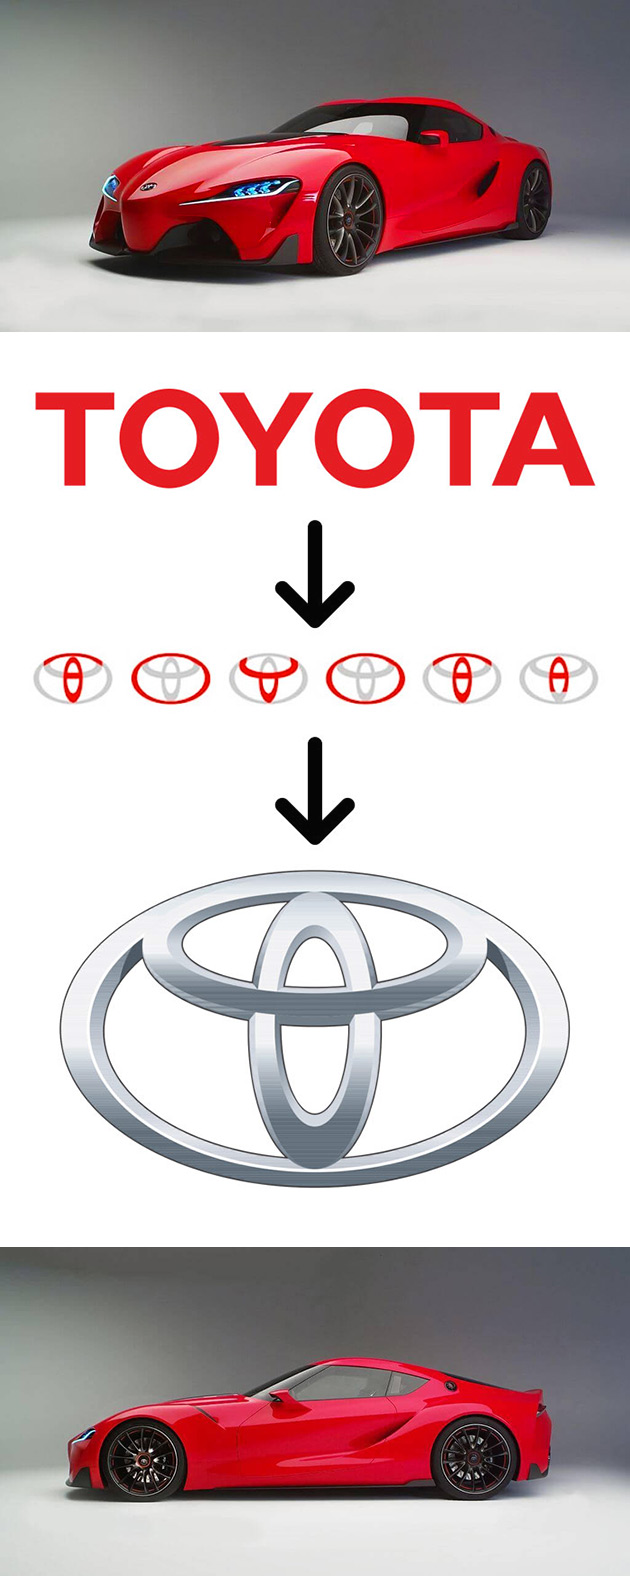 Toyota Logo Meaning